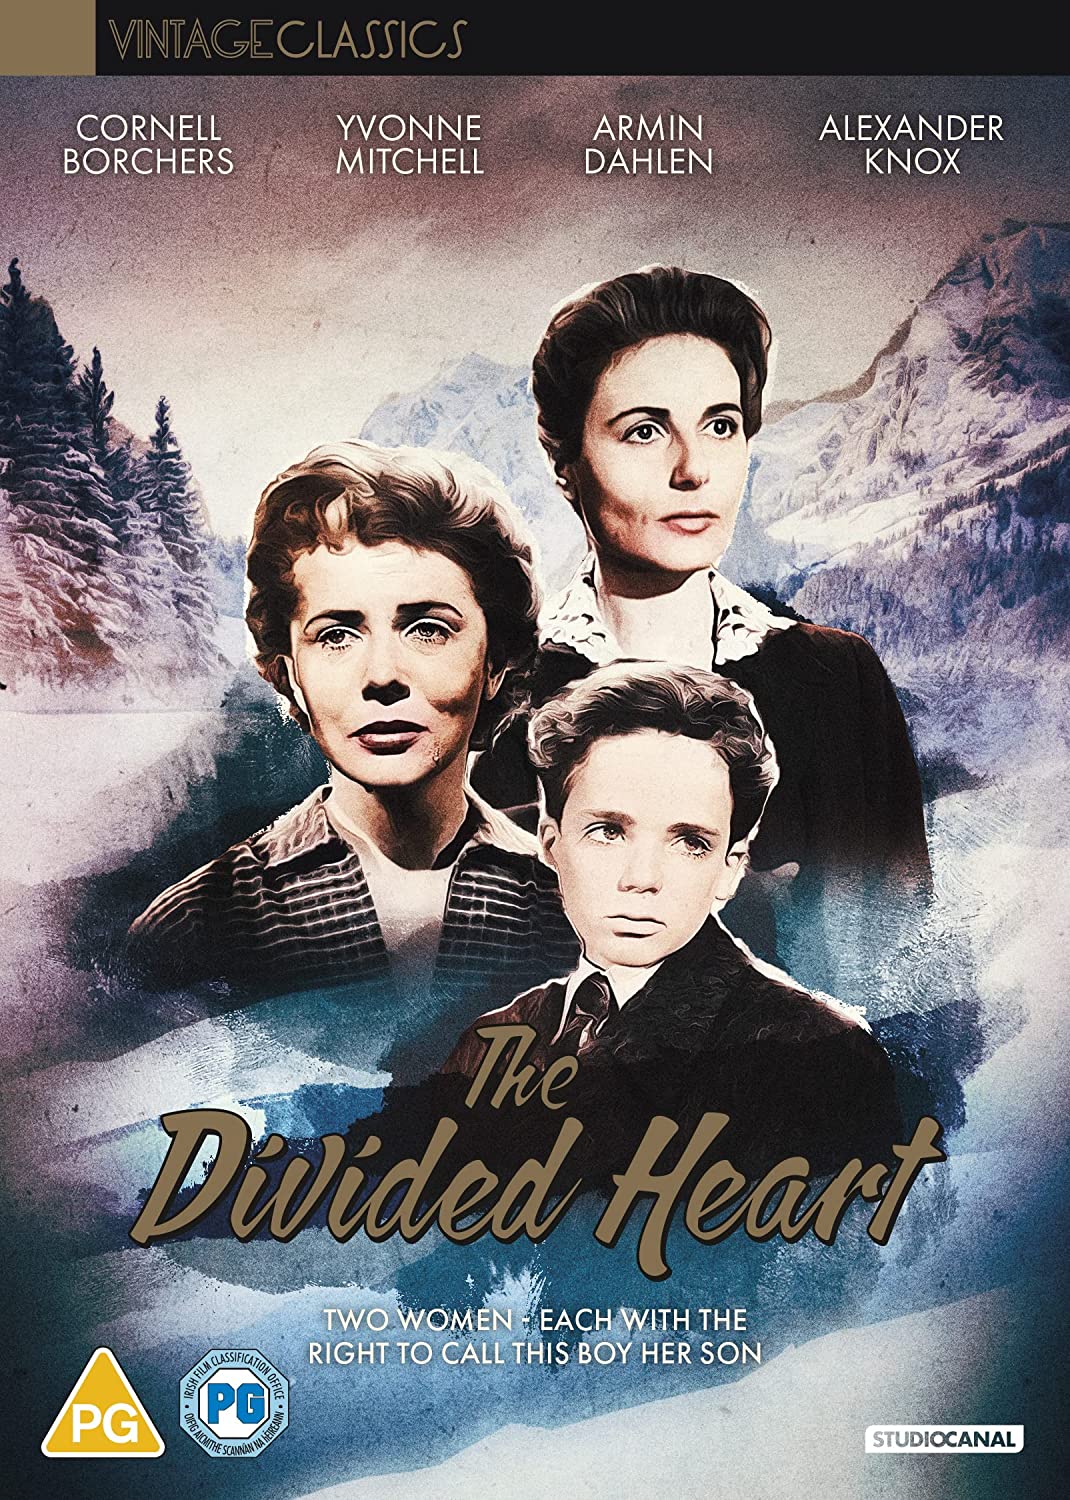 The Divided Heart (Vintage Classics) [DVD]